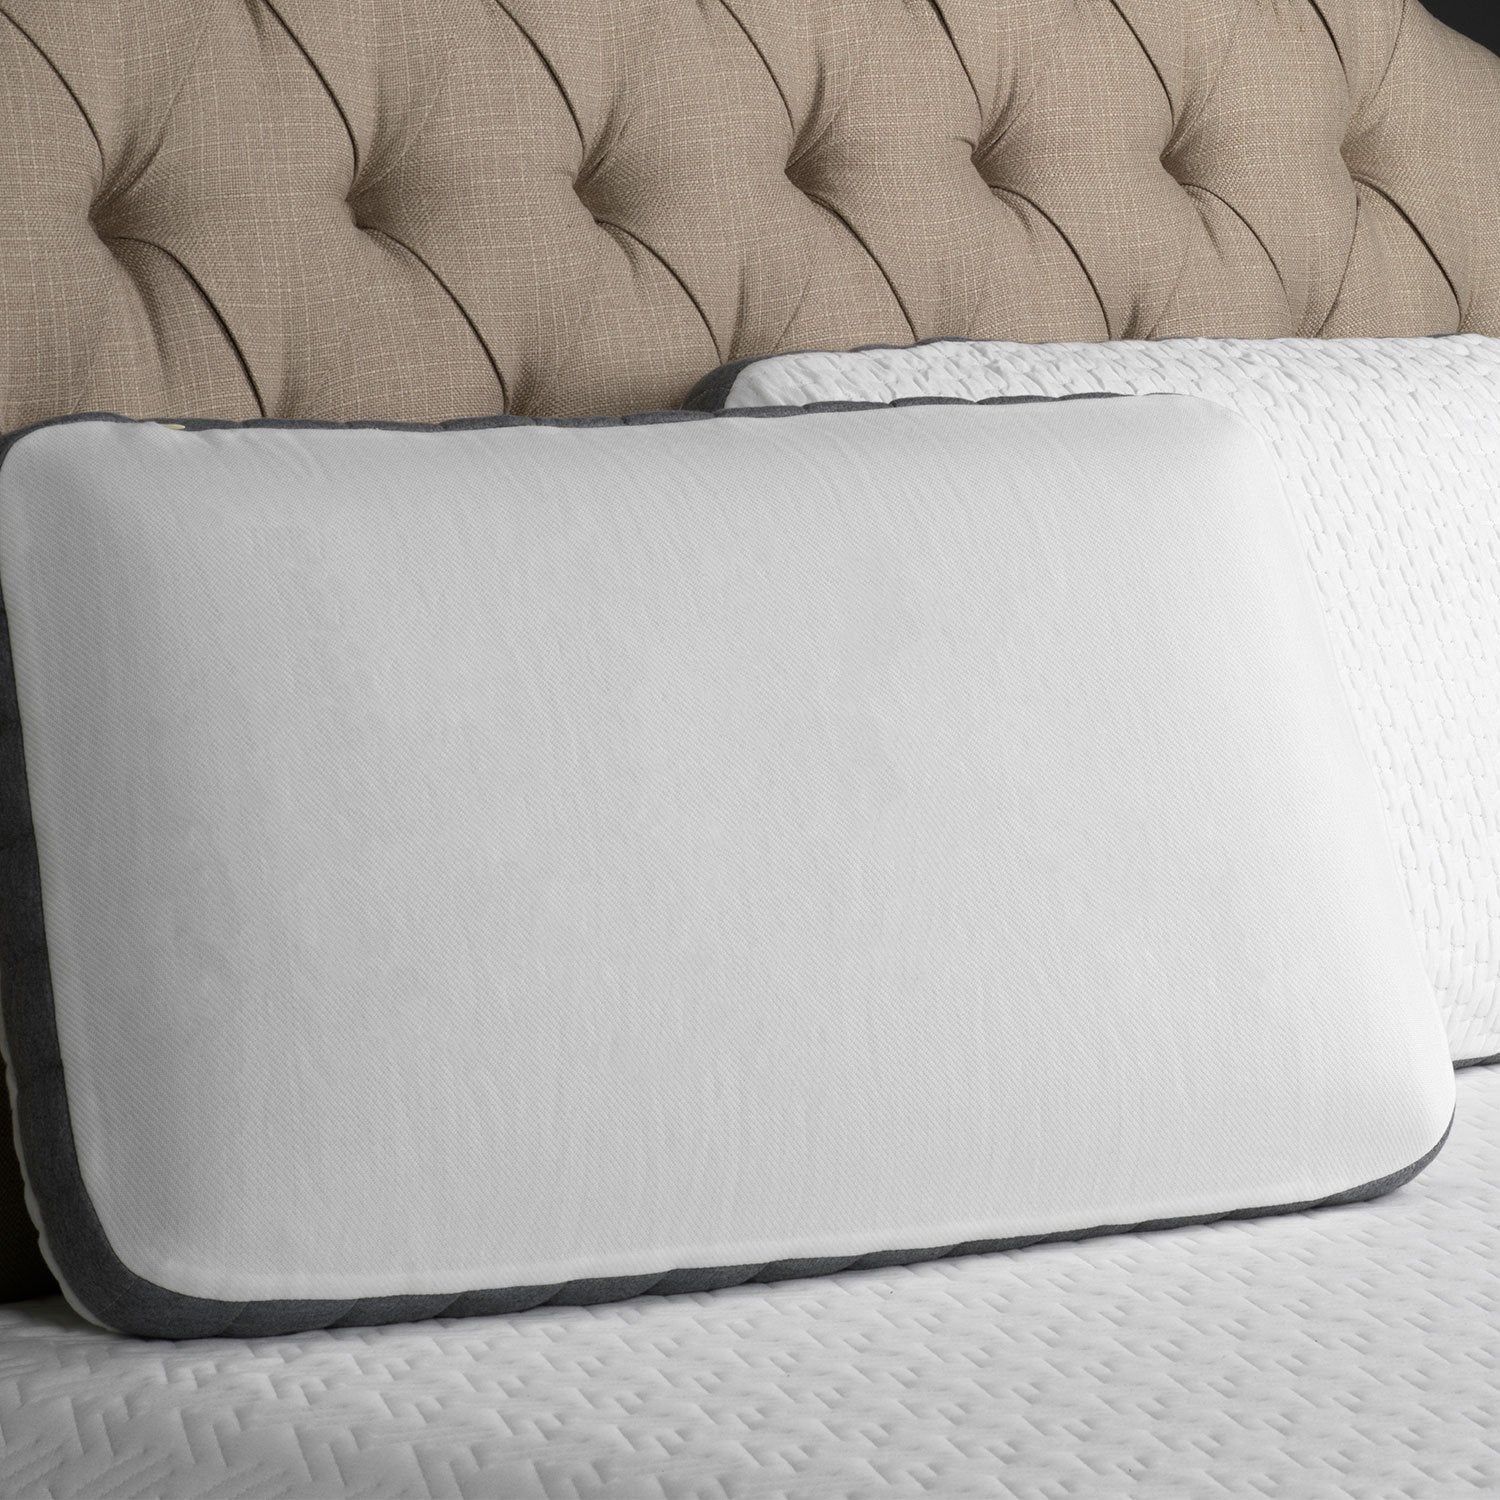 Bamboo Charcoal and Gel Memory Foam Pillow - Washable Cover - zzZensleep